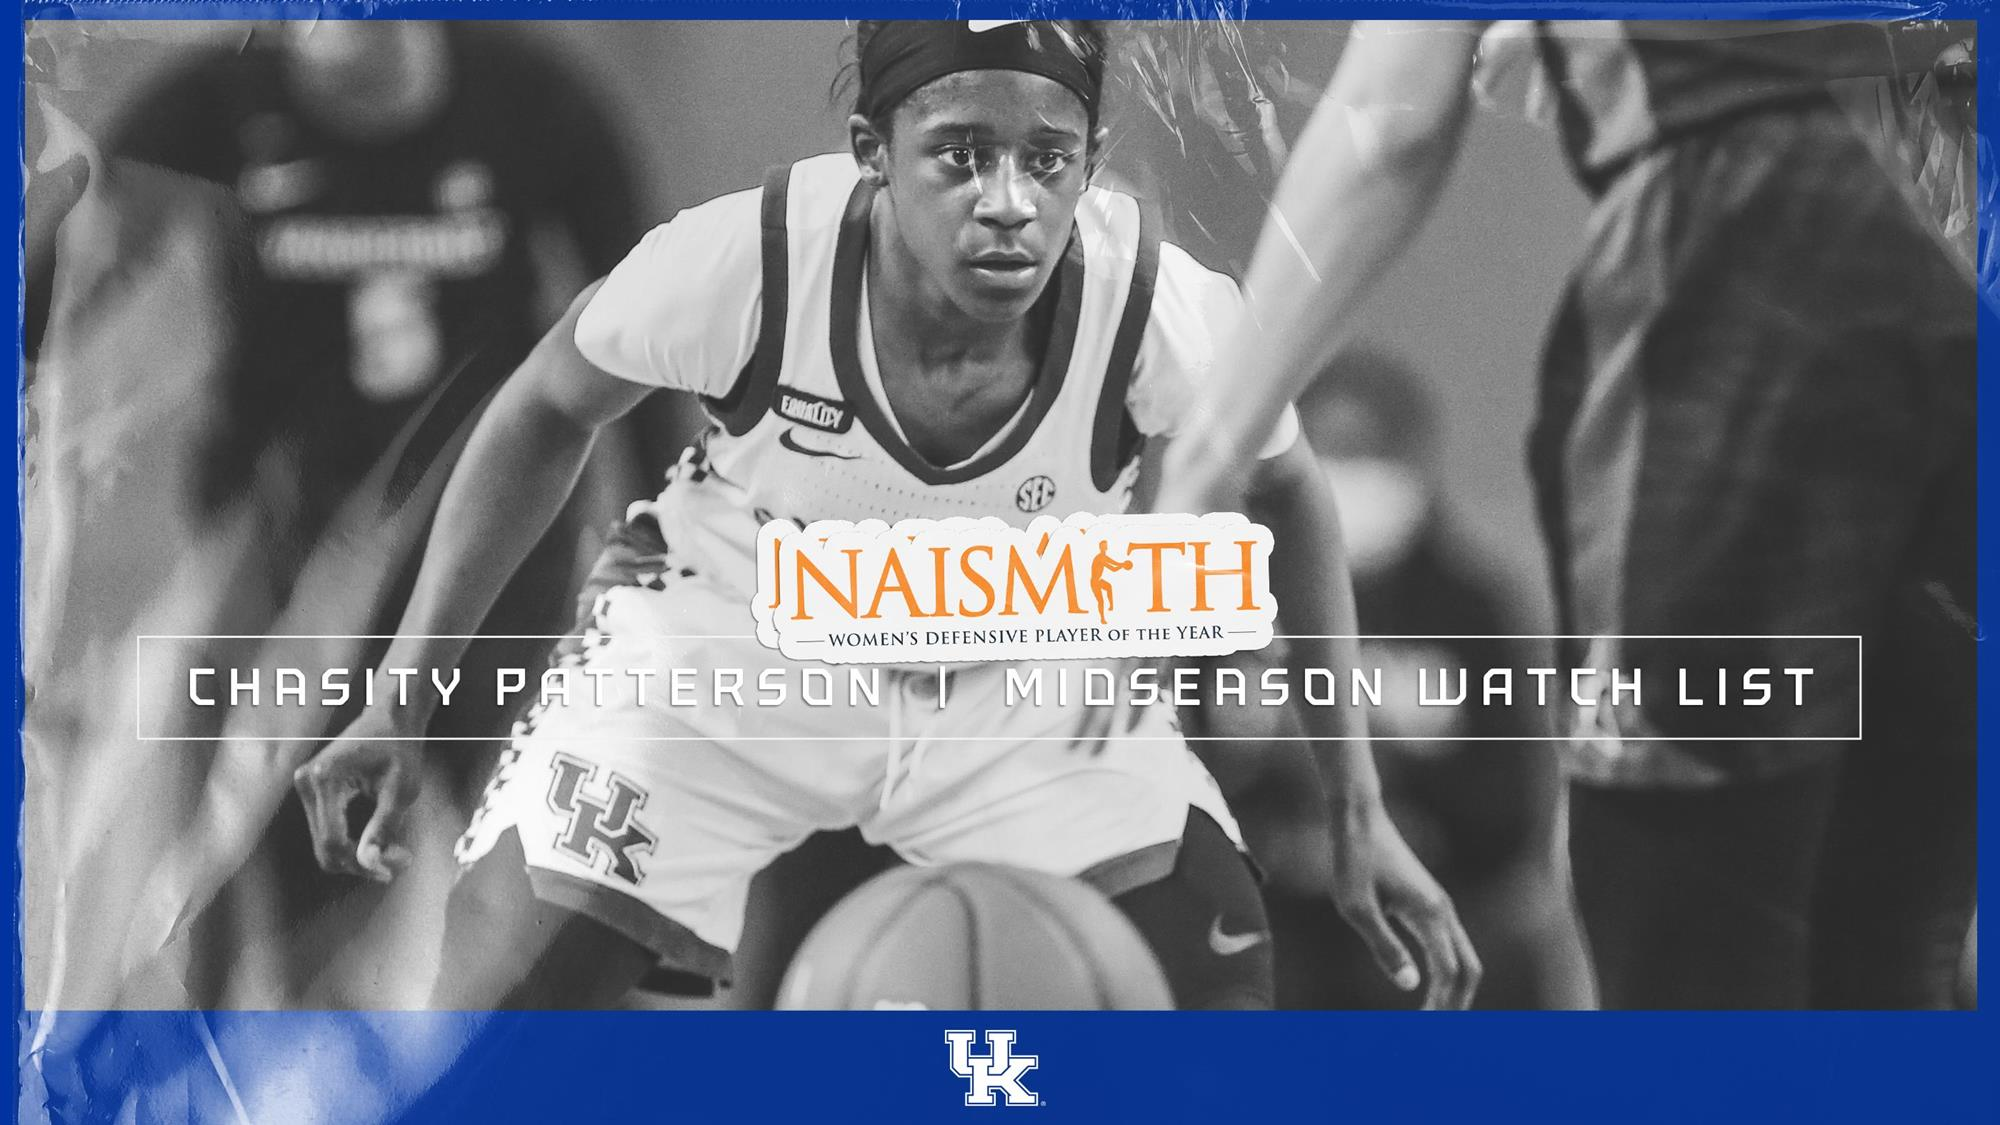 Patterson Named to the Naismith Women's Defensive Player of the Year Watch List